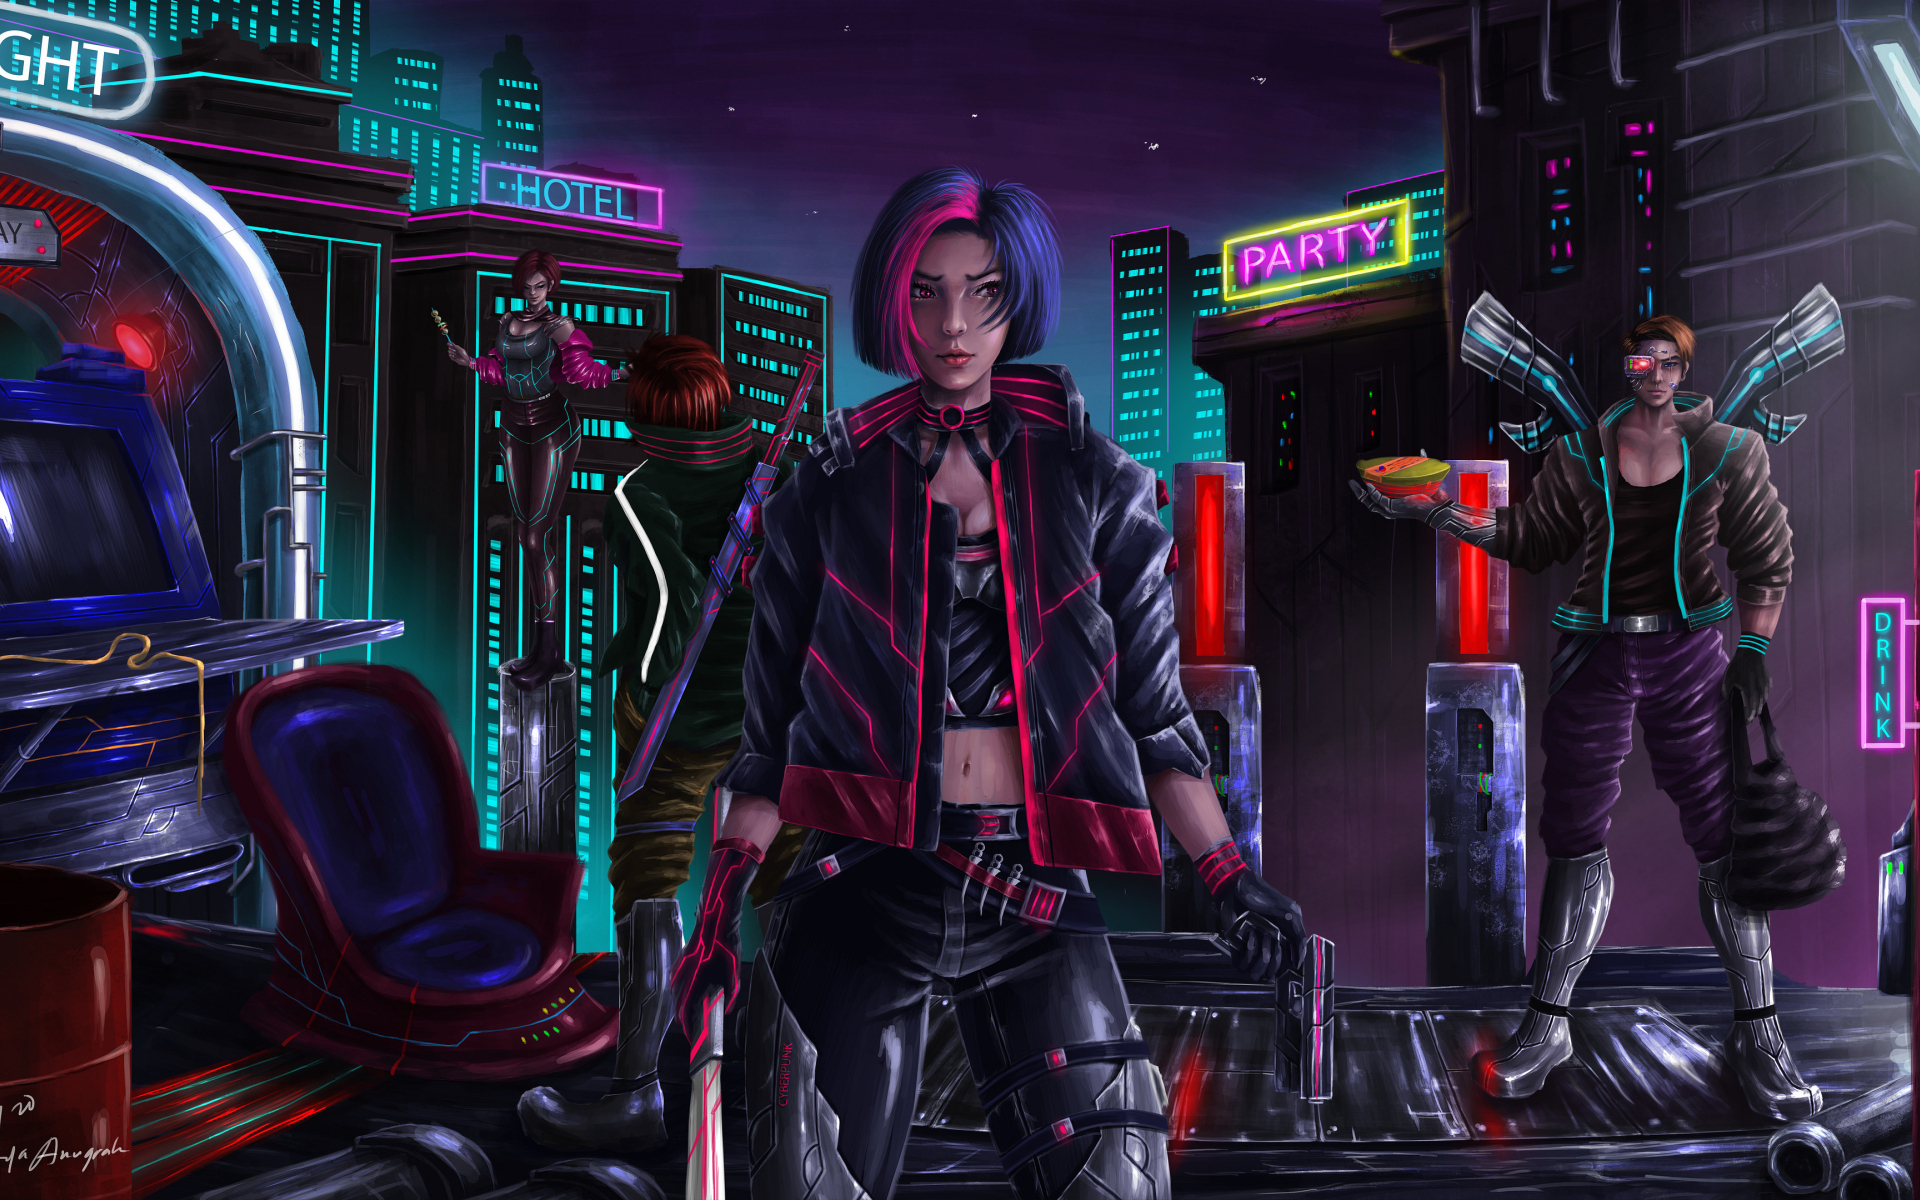 19x10 Cyberpunk 4k Gaming 10p Wallpaper Hd Games 4k Wallpapers Images Photos And Background Wallpapers Den